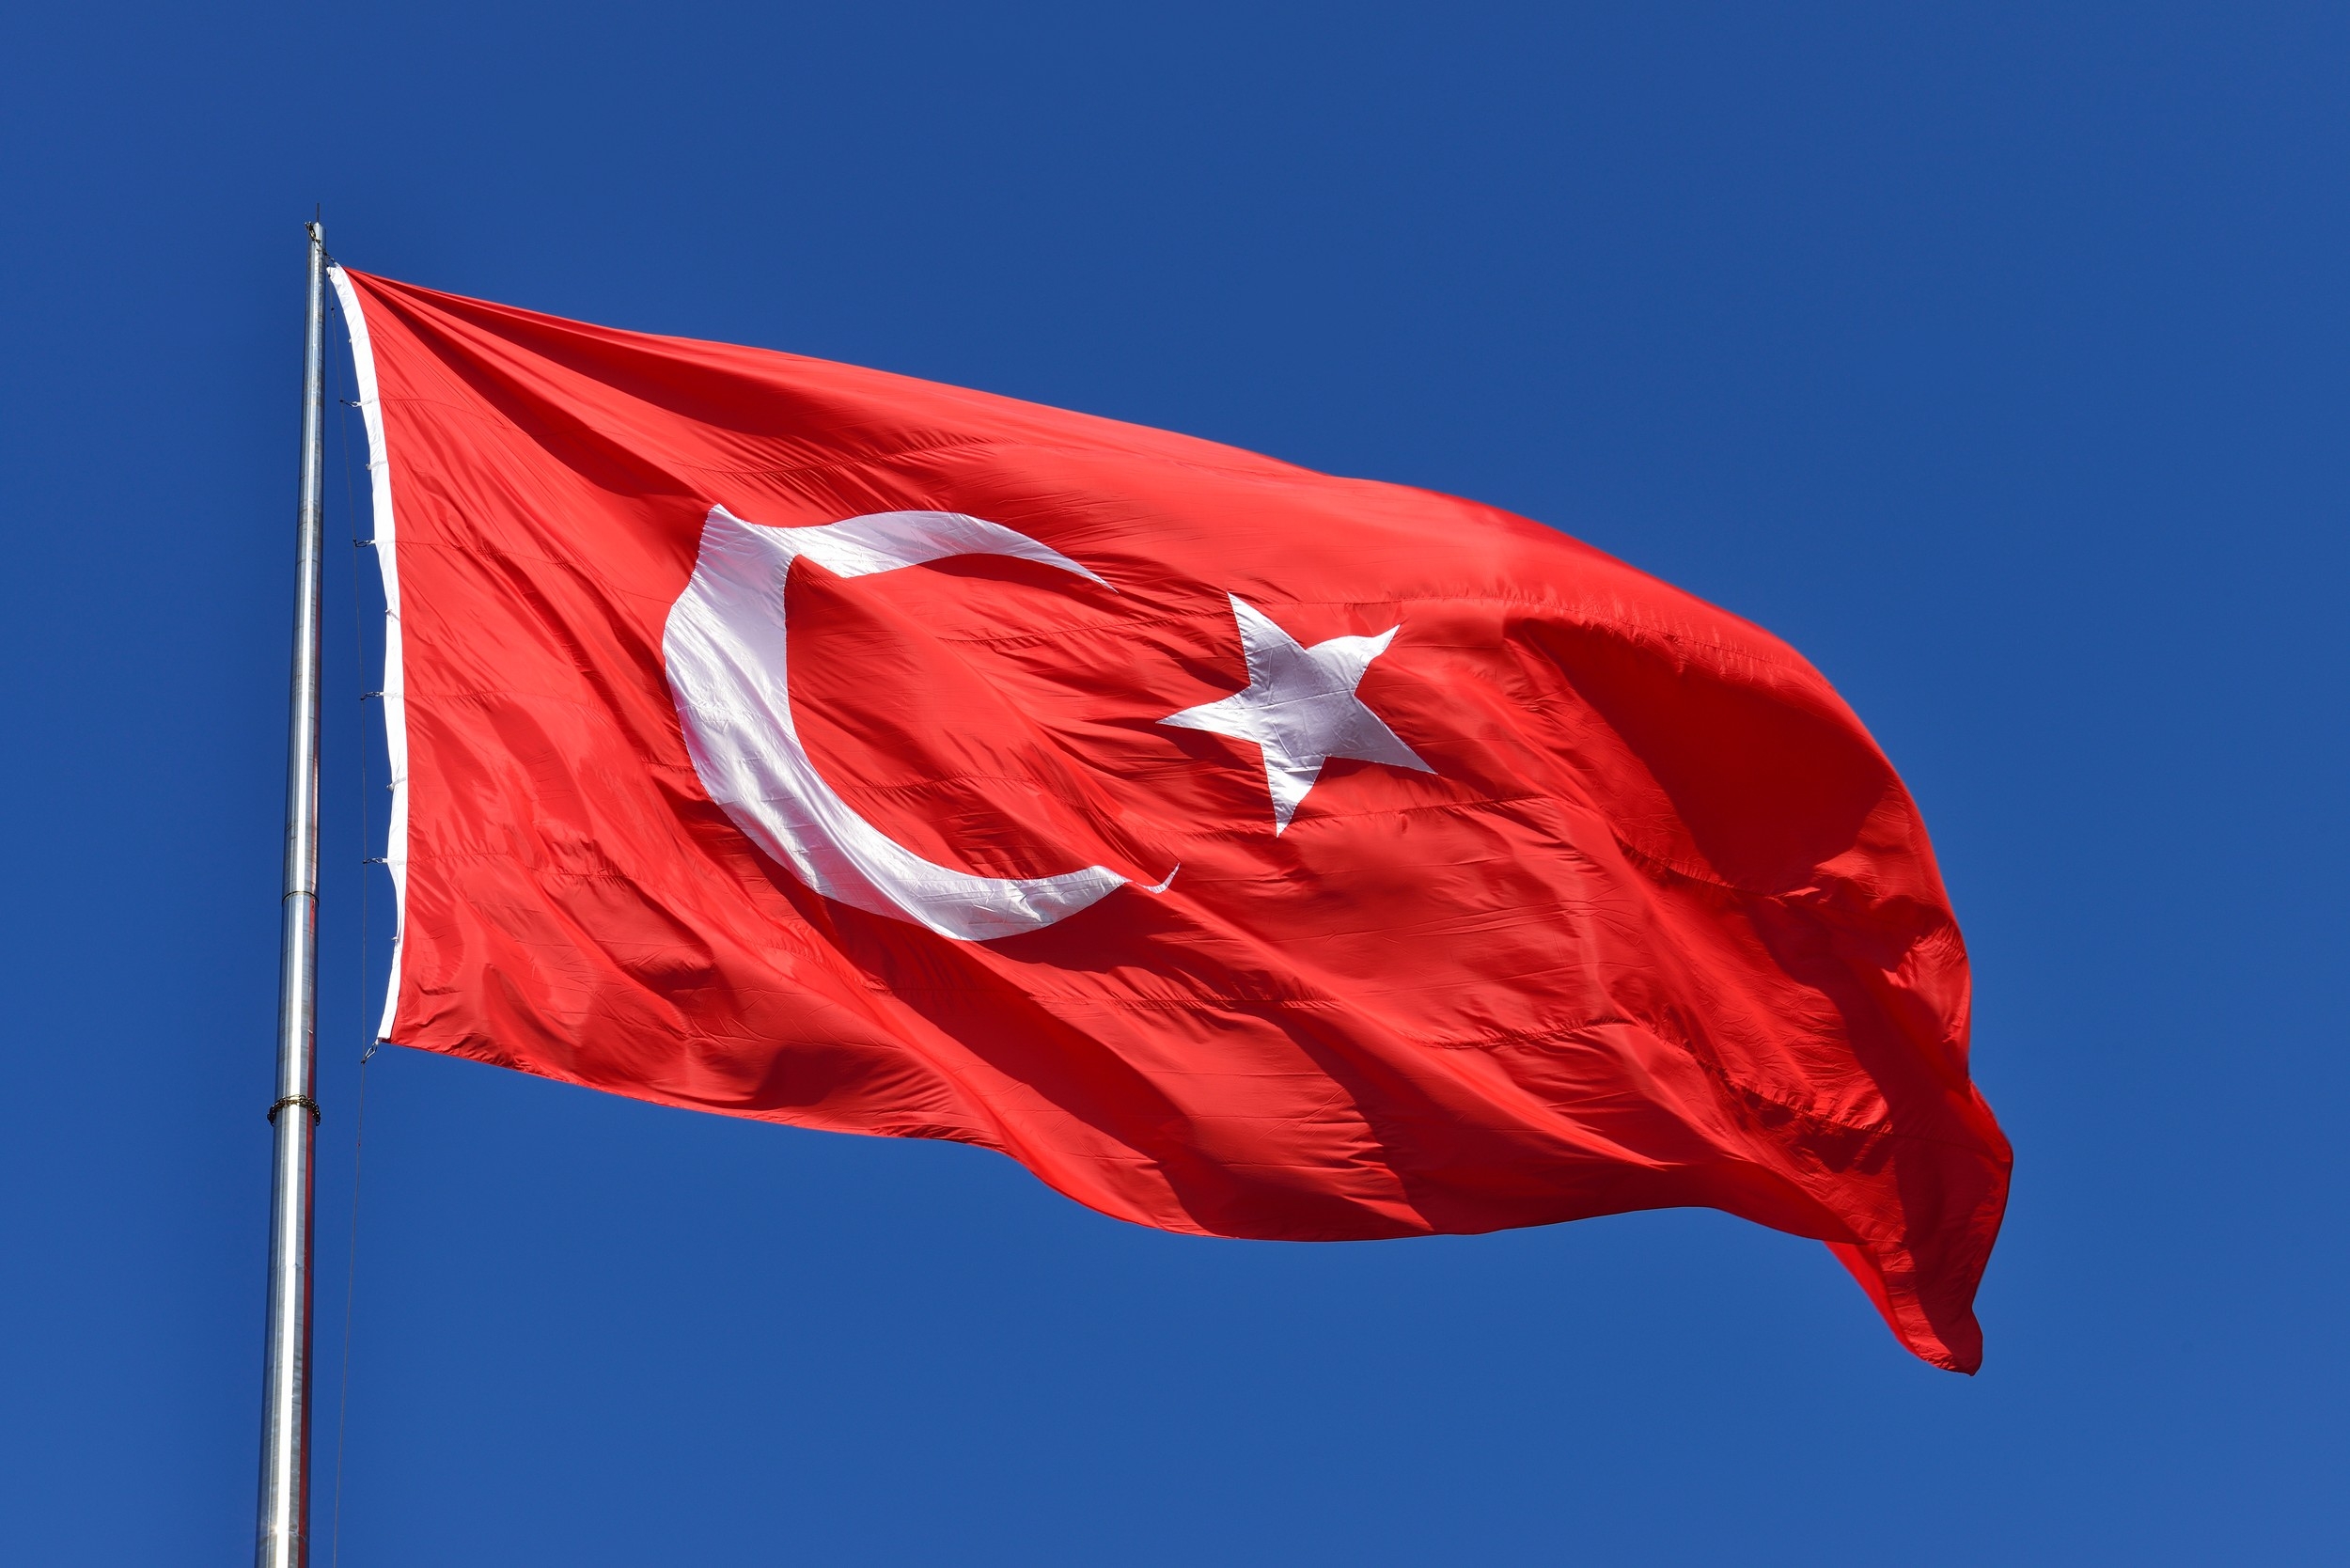 Image: 0178812510, License: Rights managed, Turkish flag in blue sky, Property Release: No or not aplicable, Model Release: No or not aplicable, Credit line: Profimedia.com, Westend